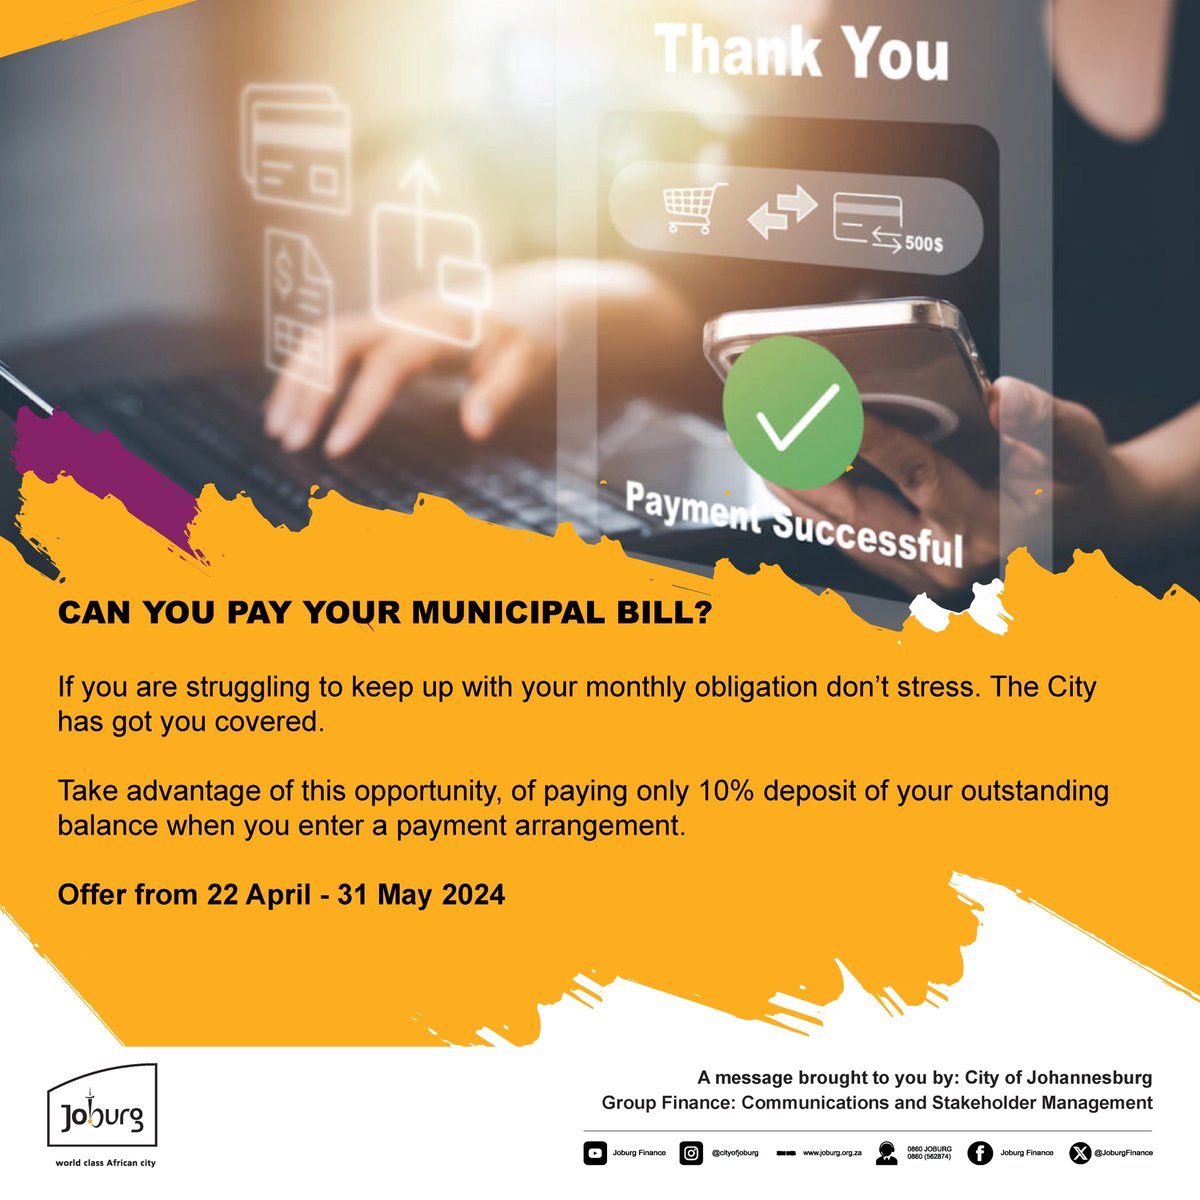 Customers can visit their nearest regional Customer Service Centre to take advantage of this opportunity or may contact the City's Credit Control Department by emailing them on creditcontrol@joburg.org.za #PayYourCoJBill #JoburgCares #JoburgCrControl ^KS